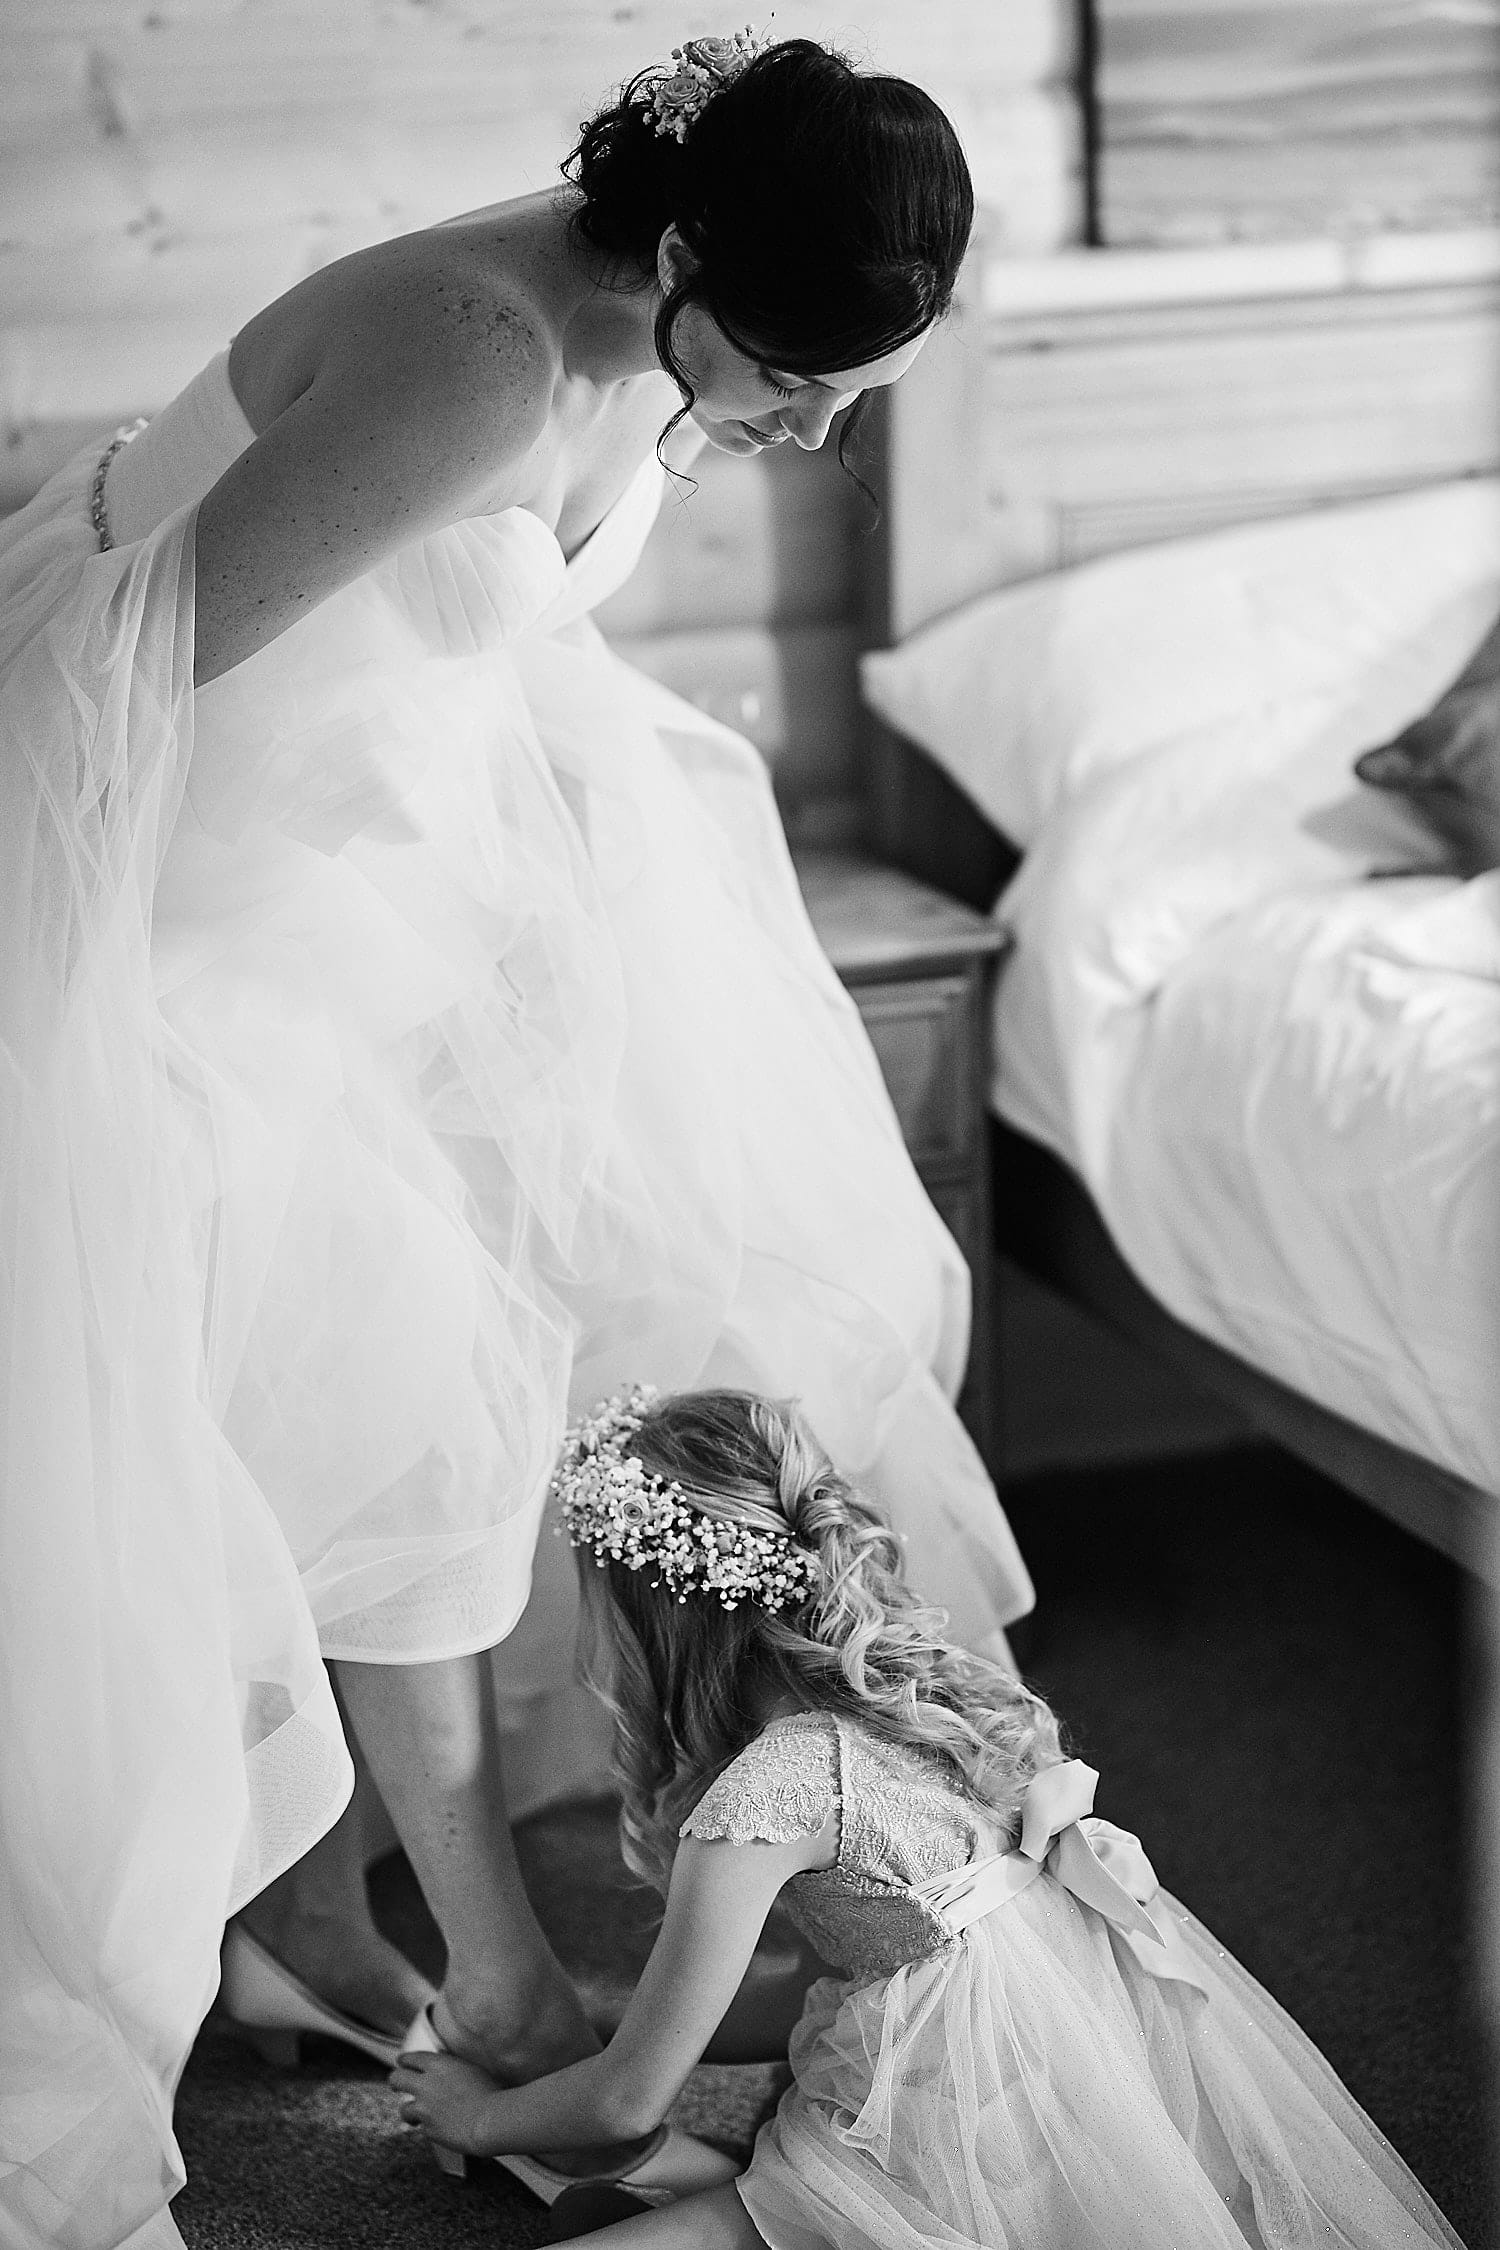 A girl helps her mother put on her wedding shoes